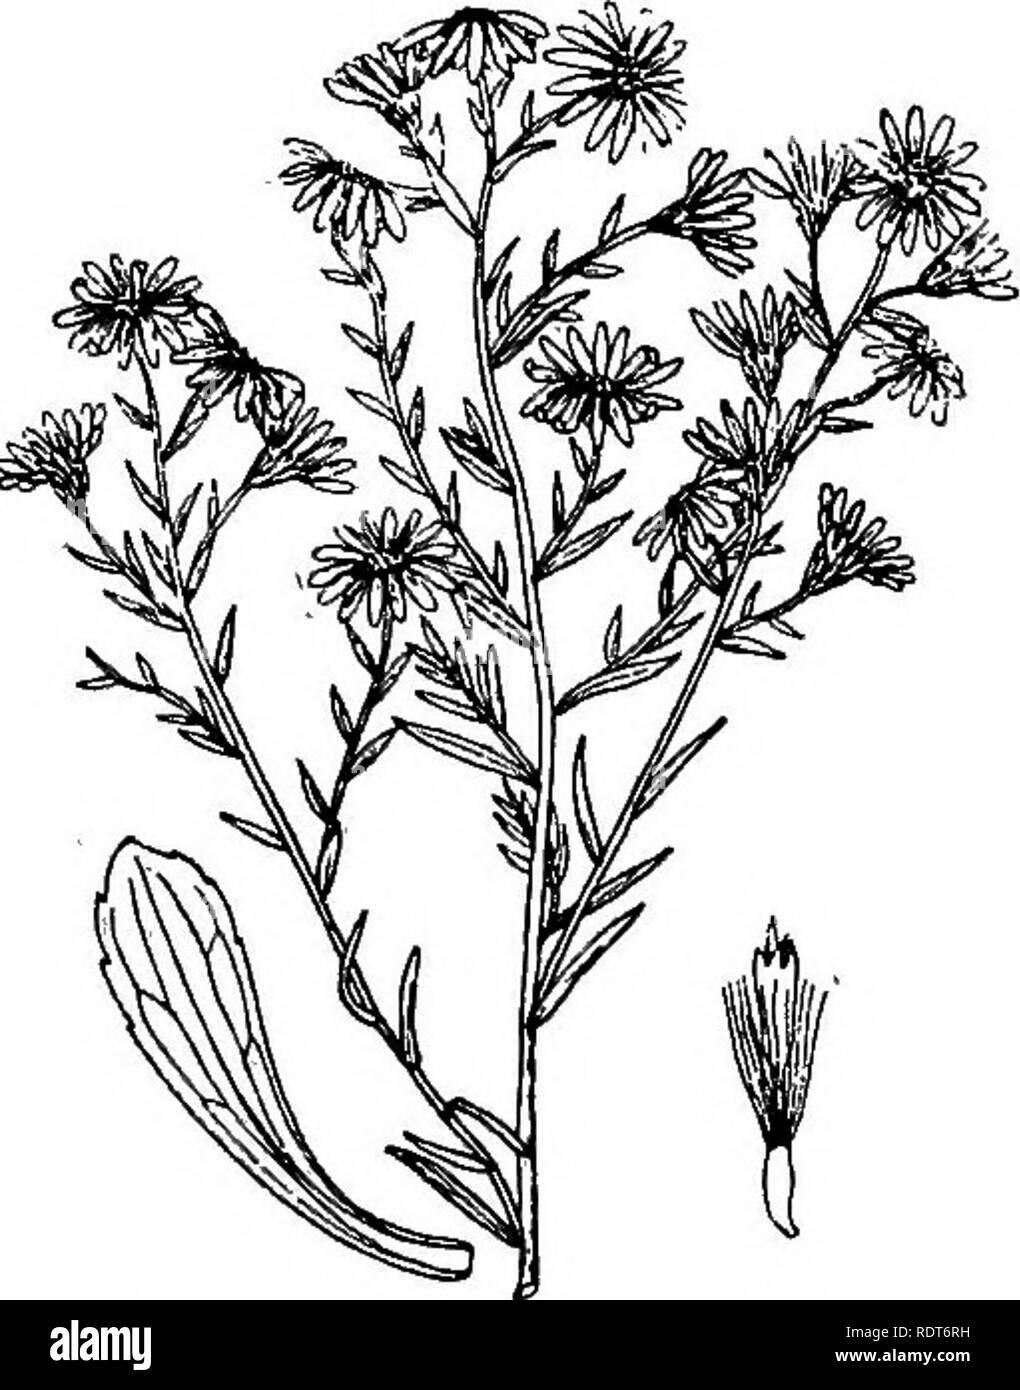 . The Indiana weed book. Weeds. WEEDS OP THE THISTLE FAMILY. 177 146. Aster ericoides L. White Heath Aster. Frost-weed Aster. Steel- weed. (P. N. 1.) Stem glabrous, or (in the variety pilosus) rough-hairy, bushy or much branched, 1-3 feet high; leaves firm or rigid, the basal ones spoon-shaped, toothed, narrowed into margined stalks; upper ones linear-lanceolate, en- tire, gradually becoming short awl-shaped. Heads very numerous, i inch broad; involucre bell-shaped, its bracts linear, leathery, abruptly pointed, overlapping in about 3 rows; rays 15-25, white or pink tinged; disk often reddish- Stock Photo